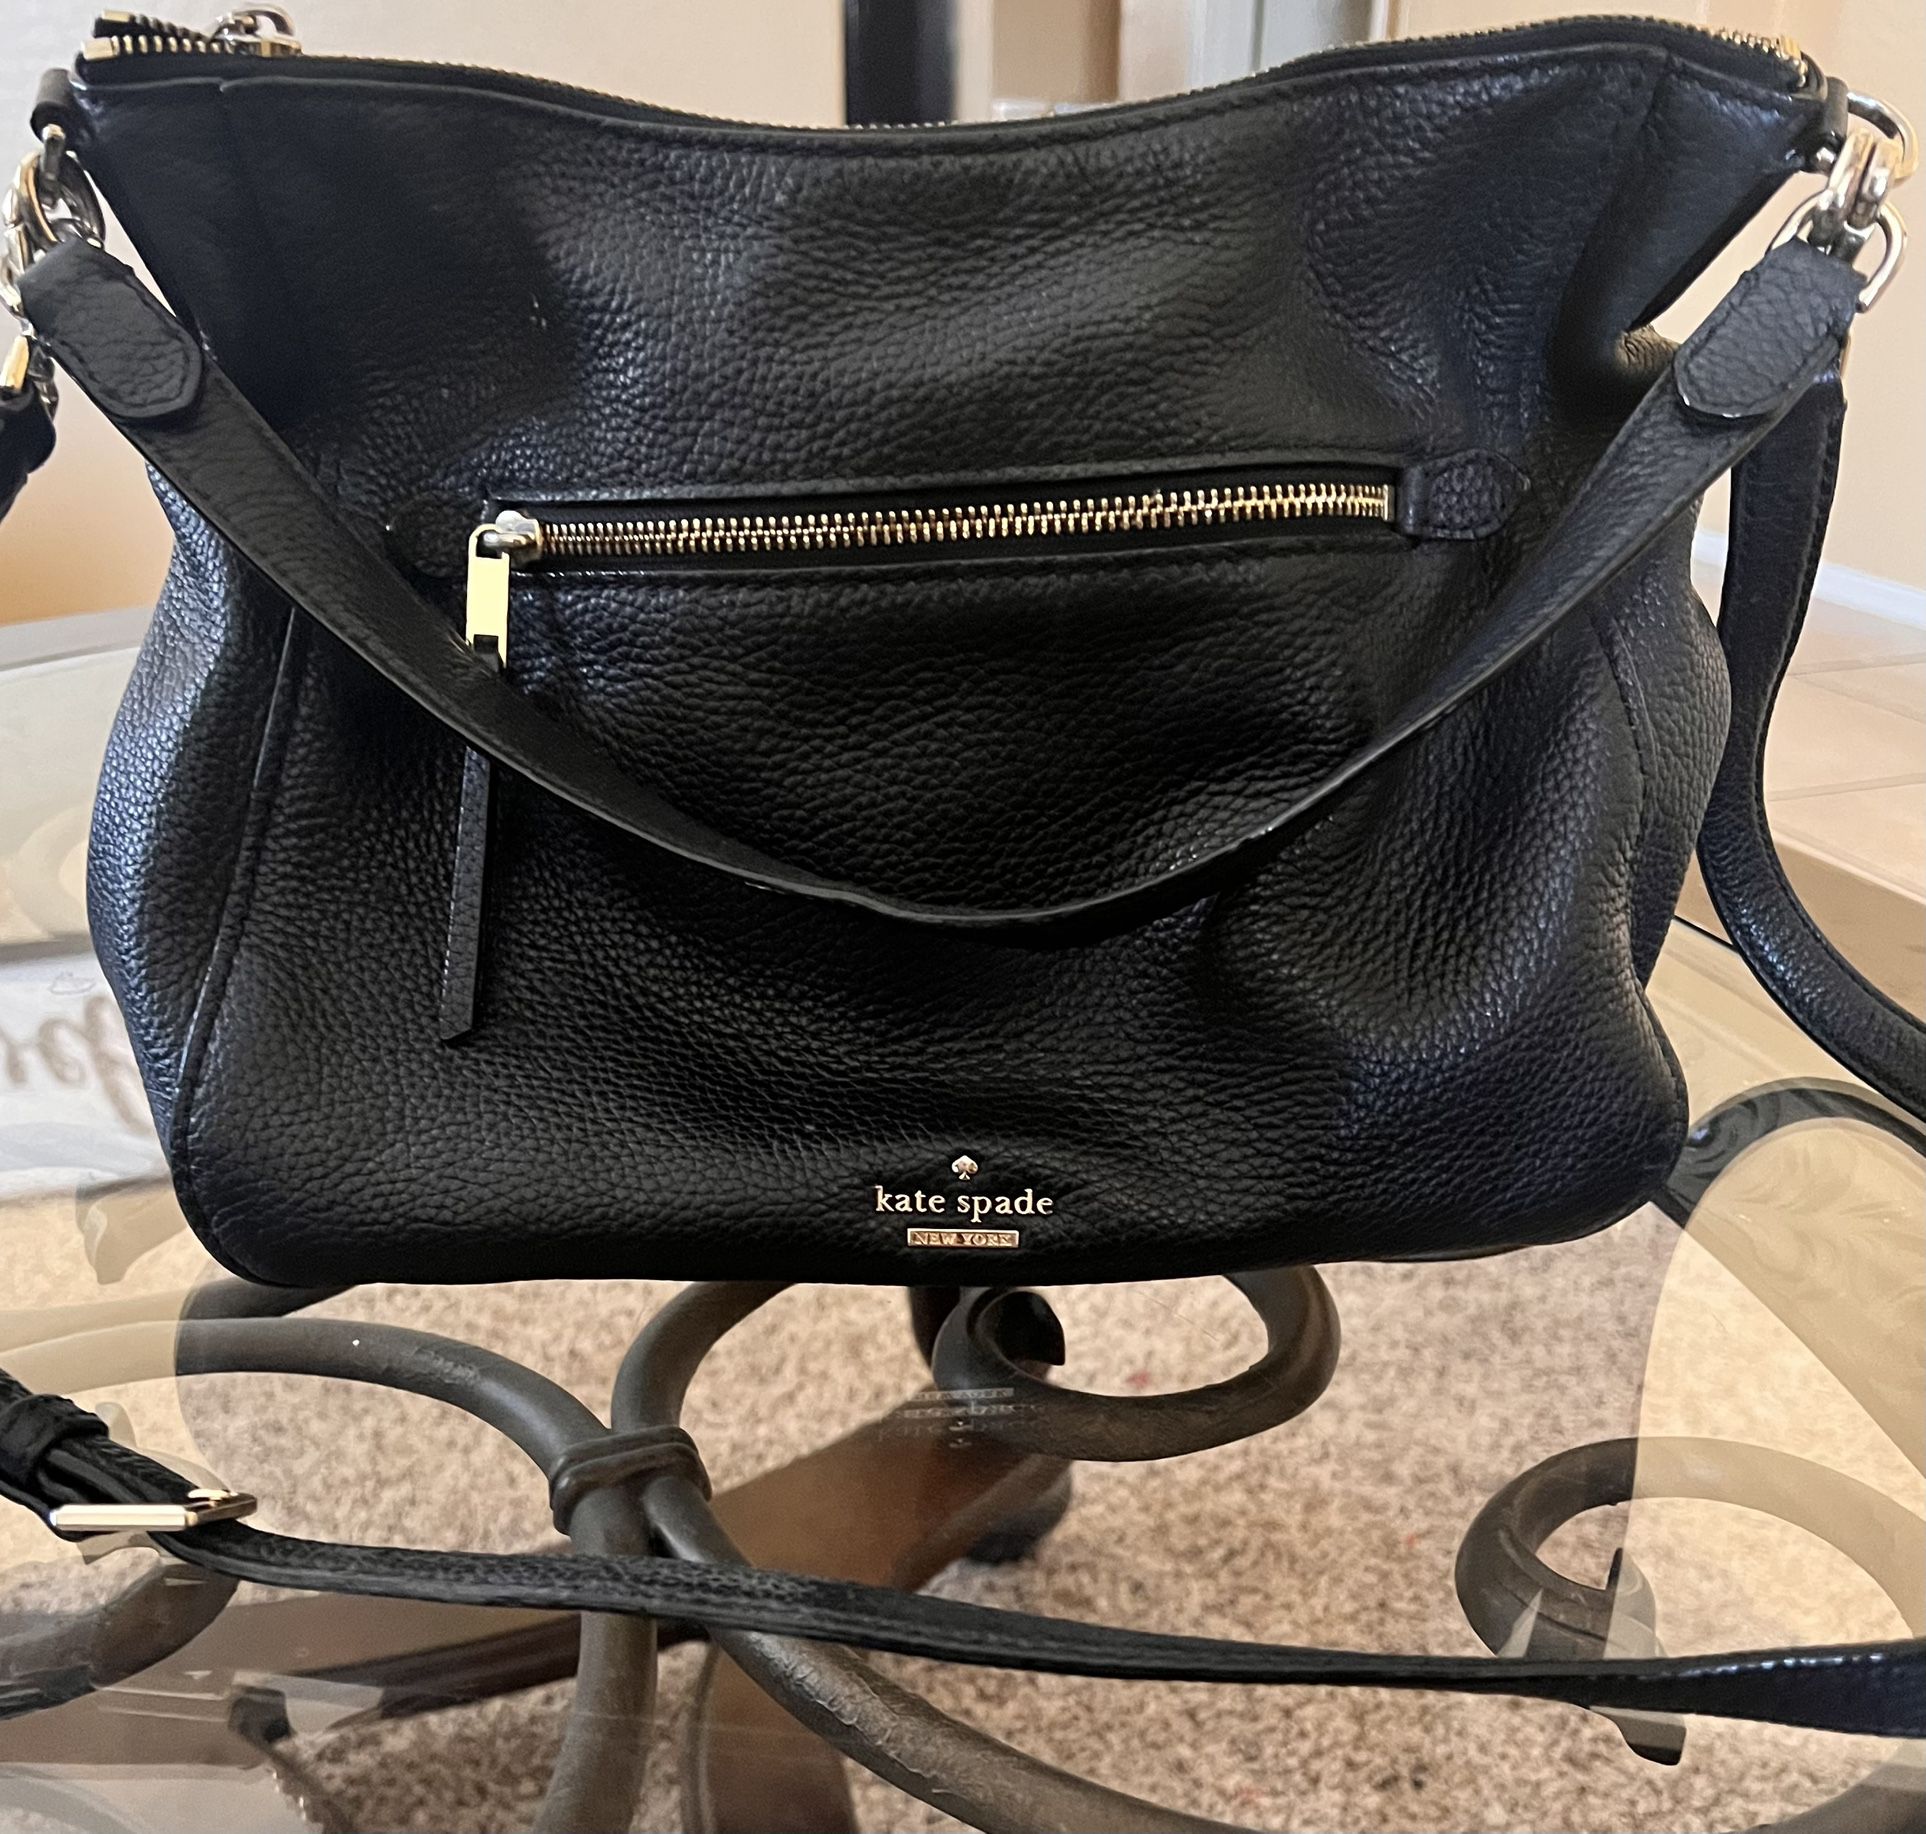 Kate Spade Purse And Wallet Included 